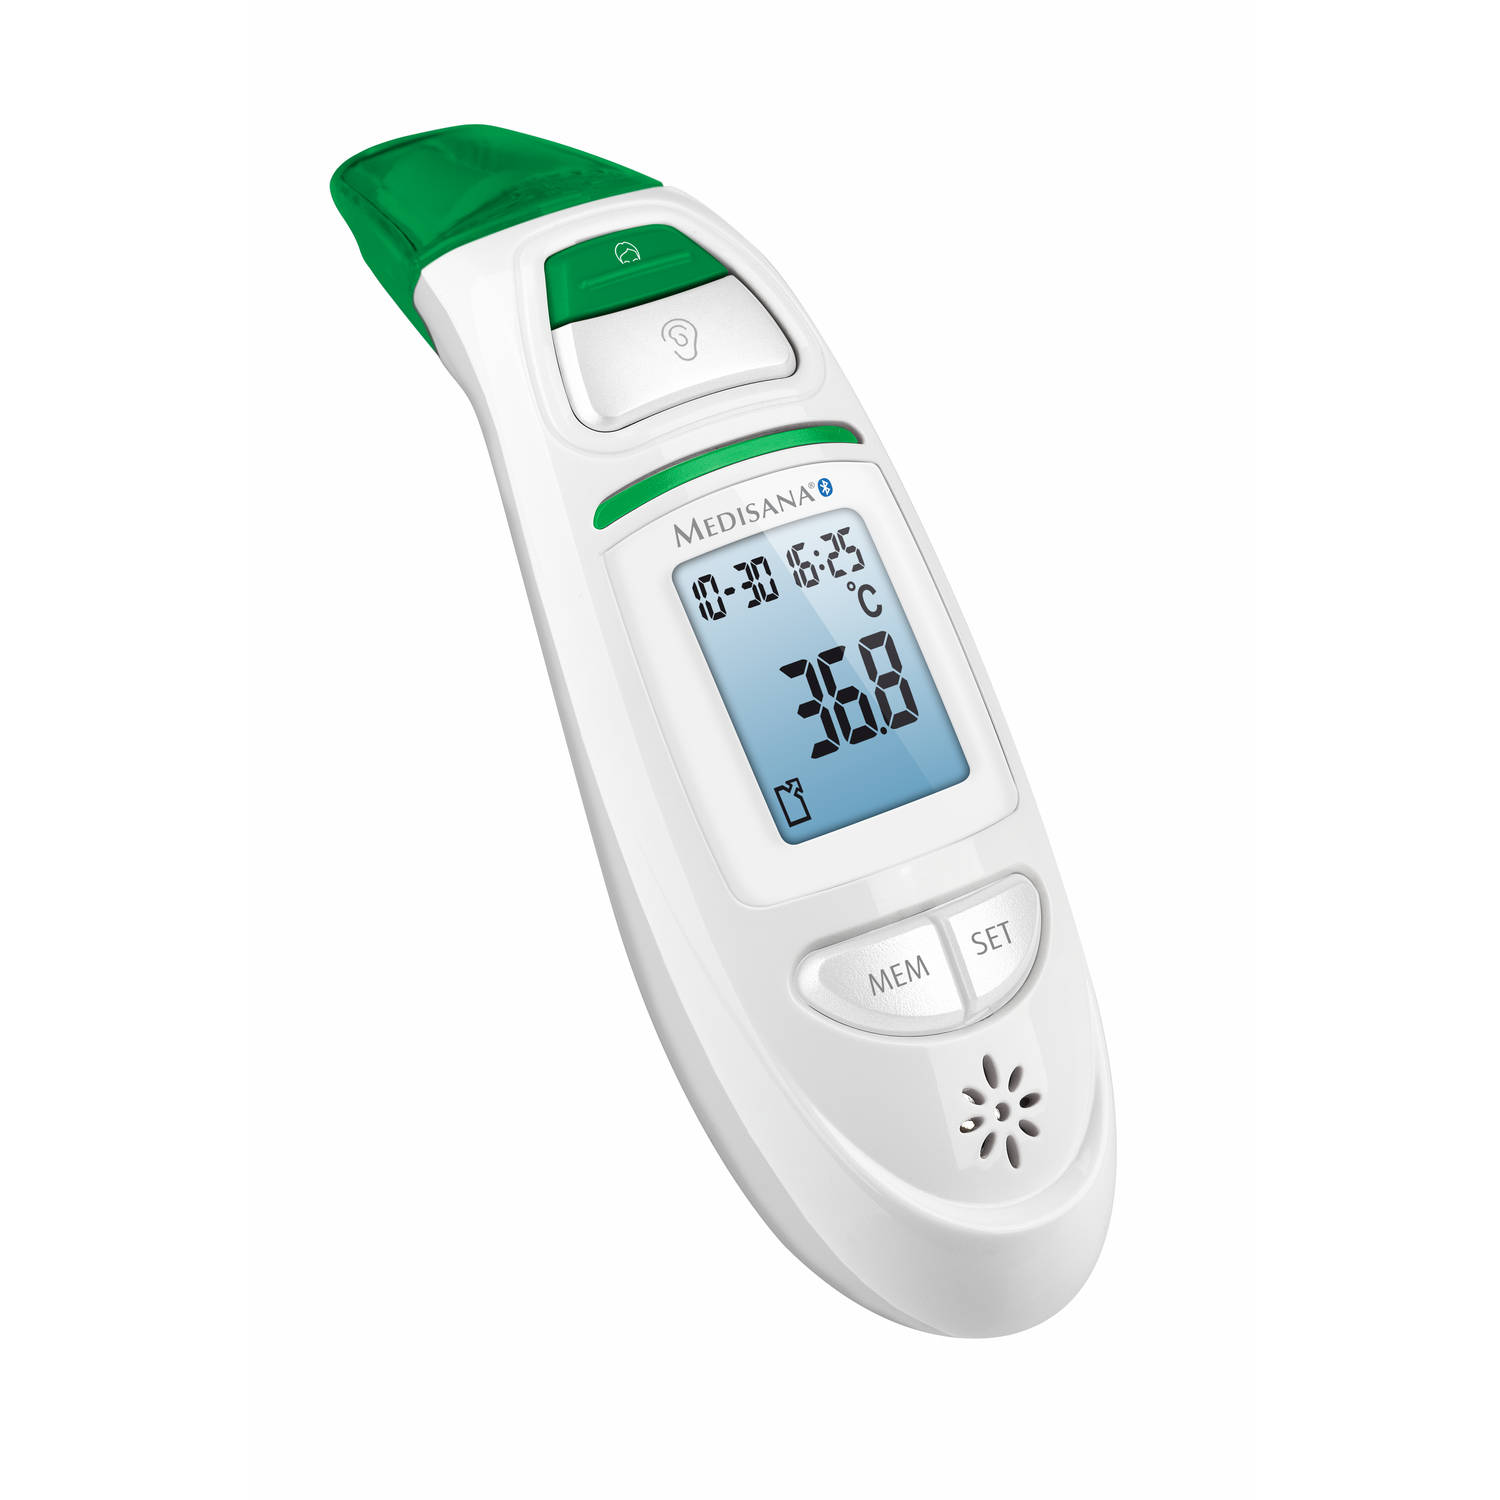 Appal vrachtauto helper Medisana thermometer non contact TM 750 Connect | Blokker